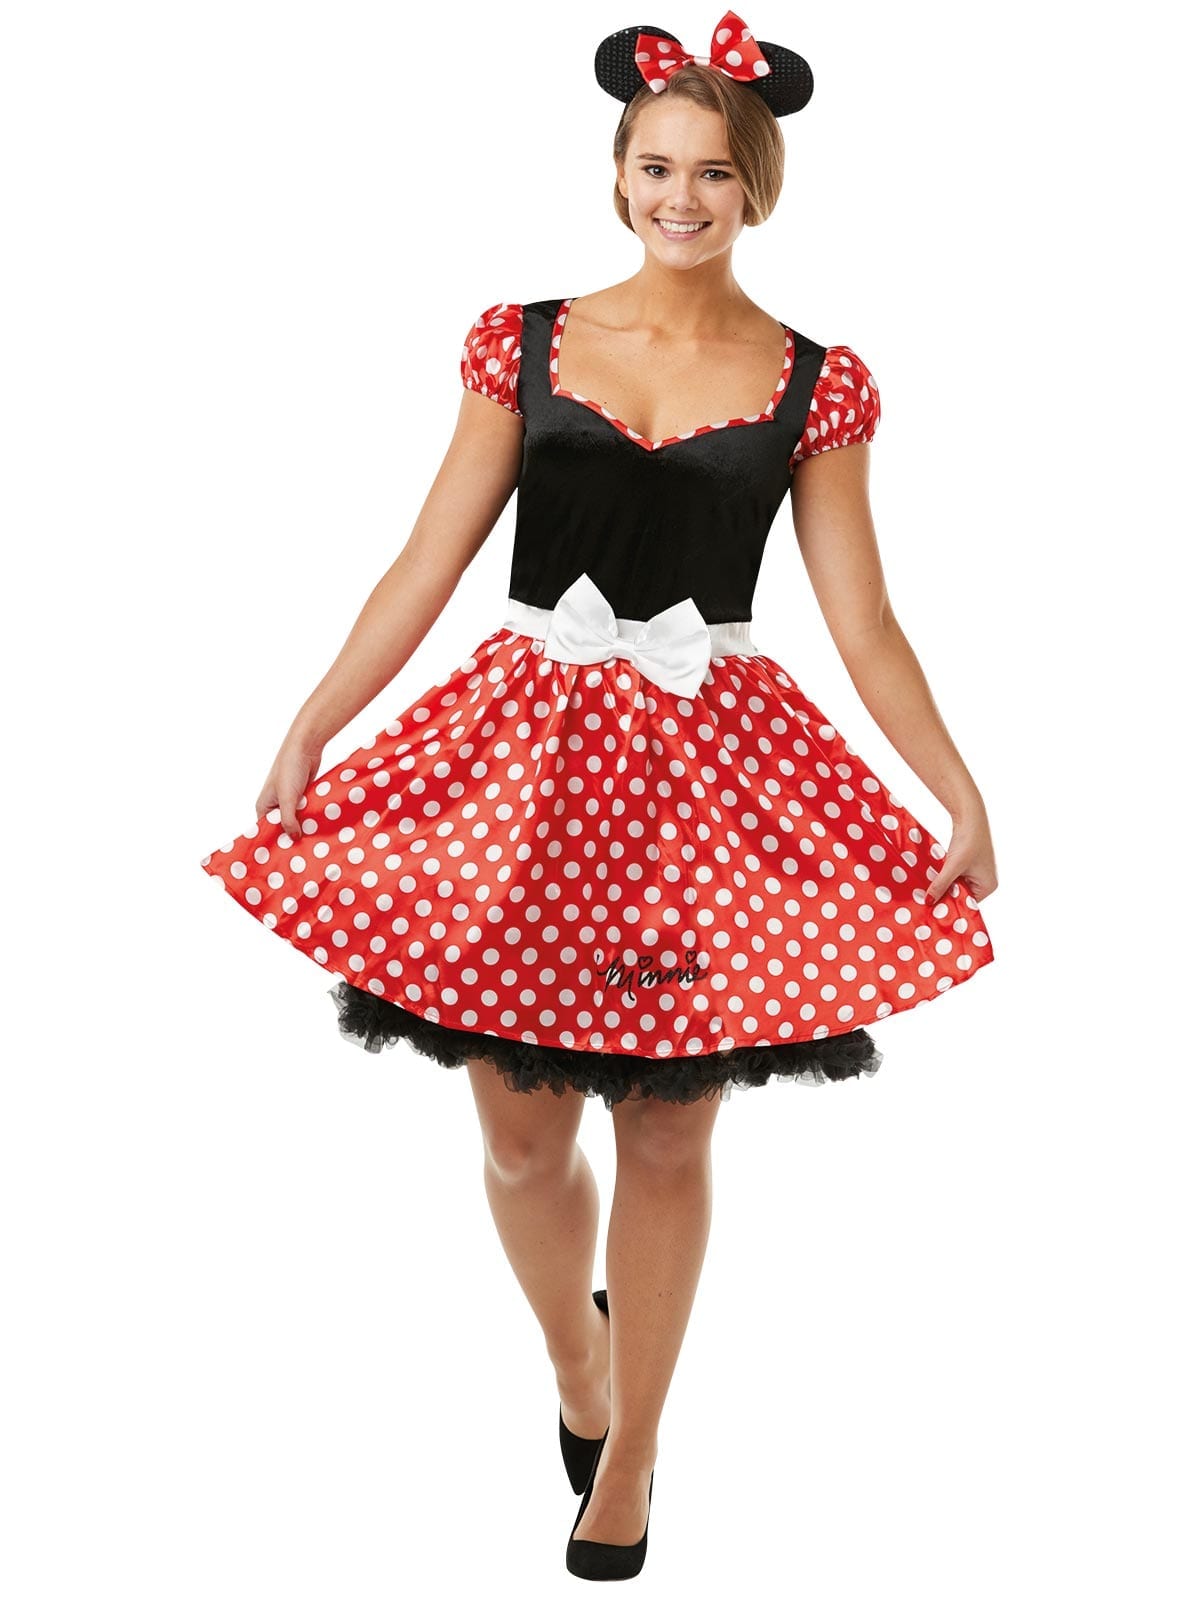 Minnie Mouse Sassy Costume, Adult - The Costumery